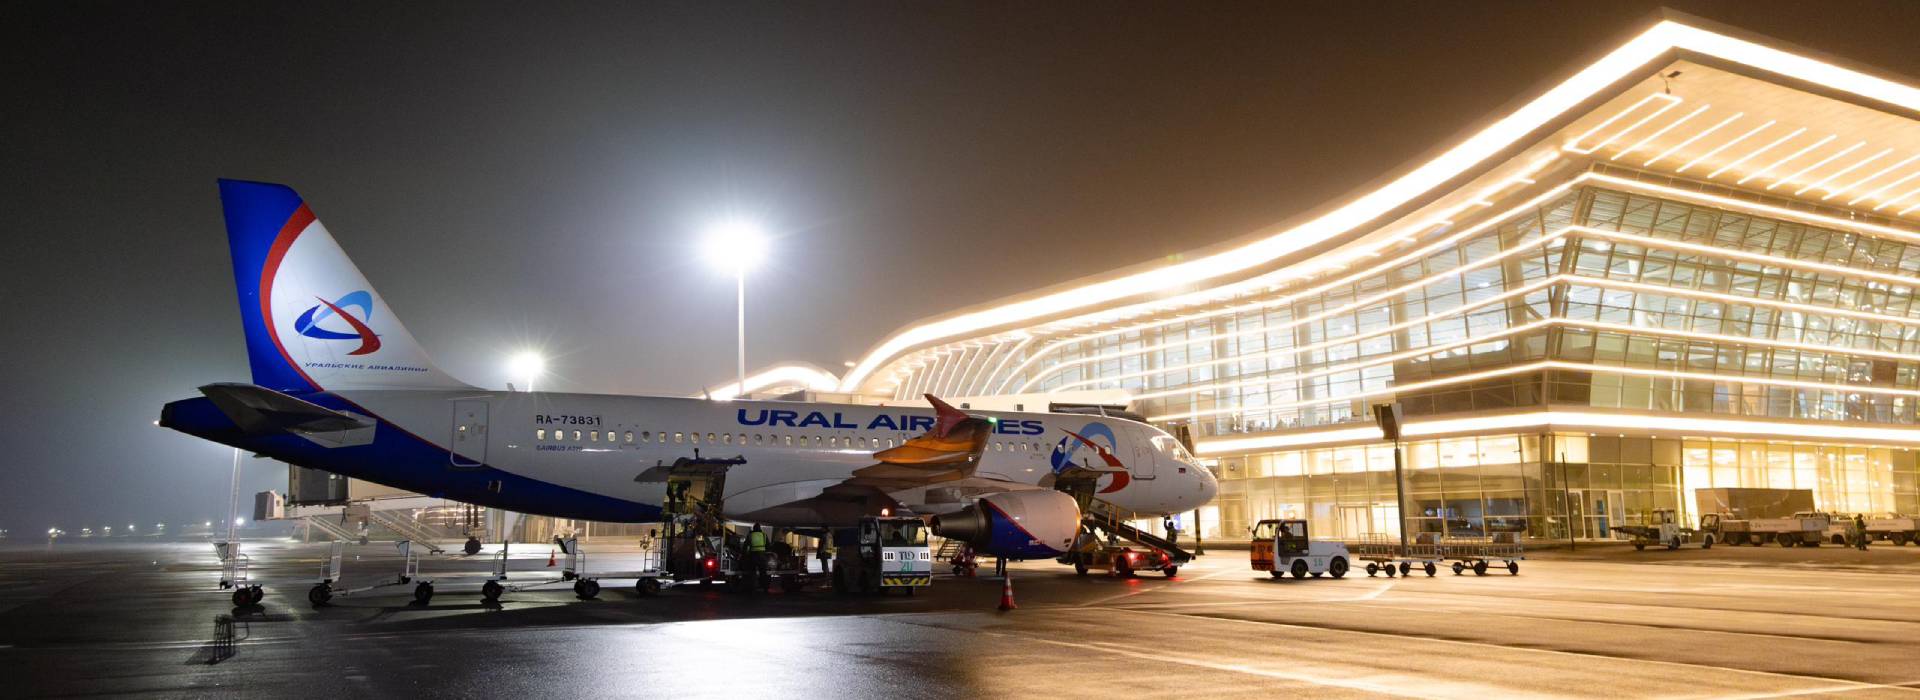 Russian Ural Airlines taking off from Domodedovo airport to Uzbekistan's Samarkand